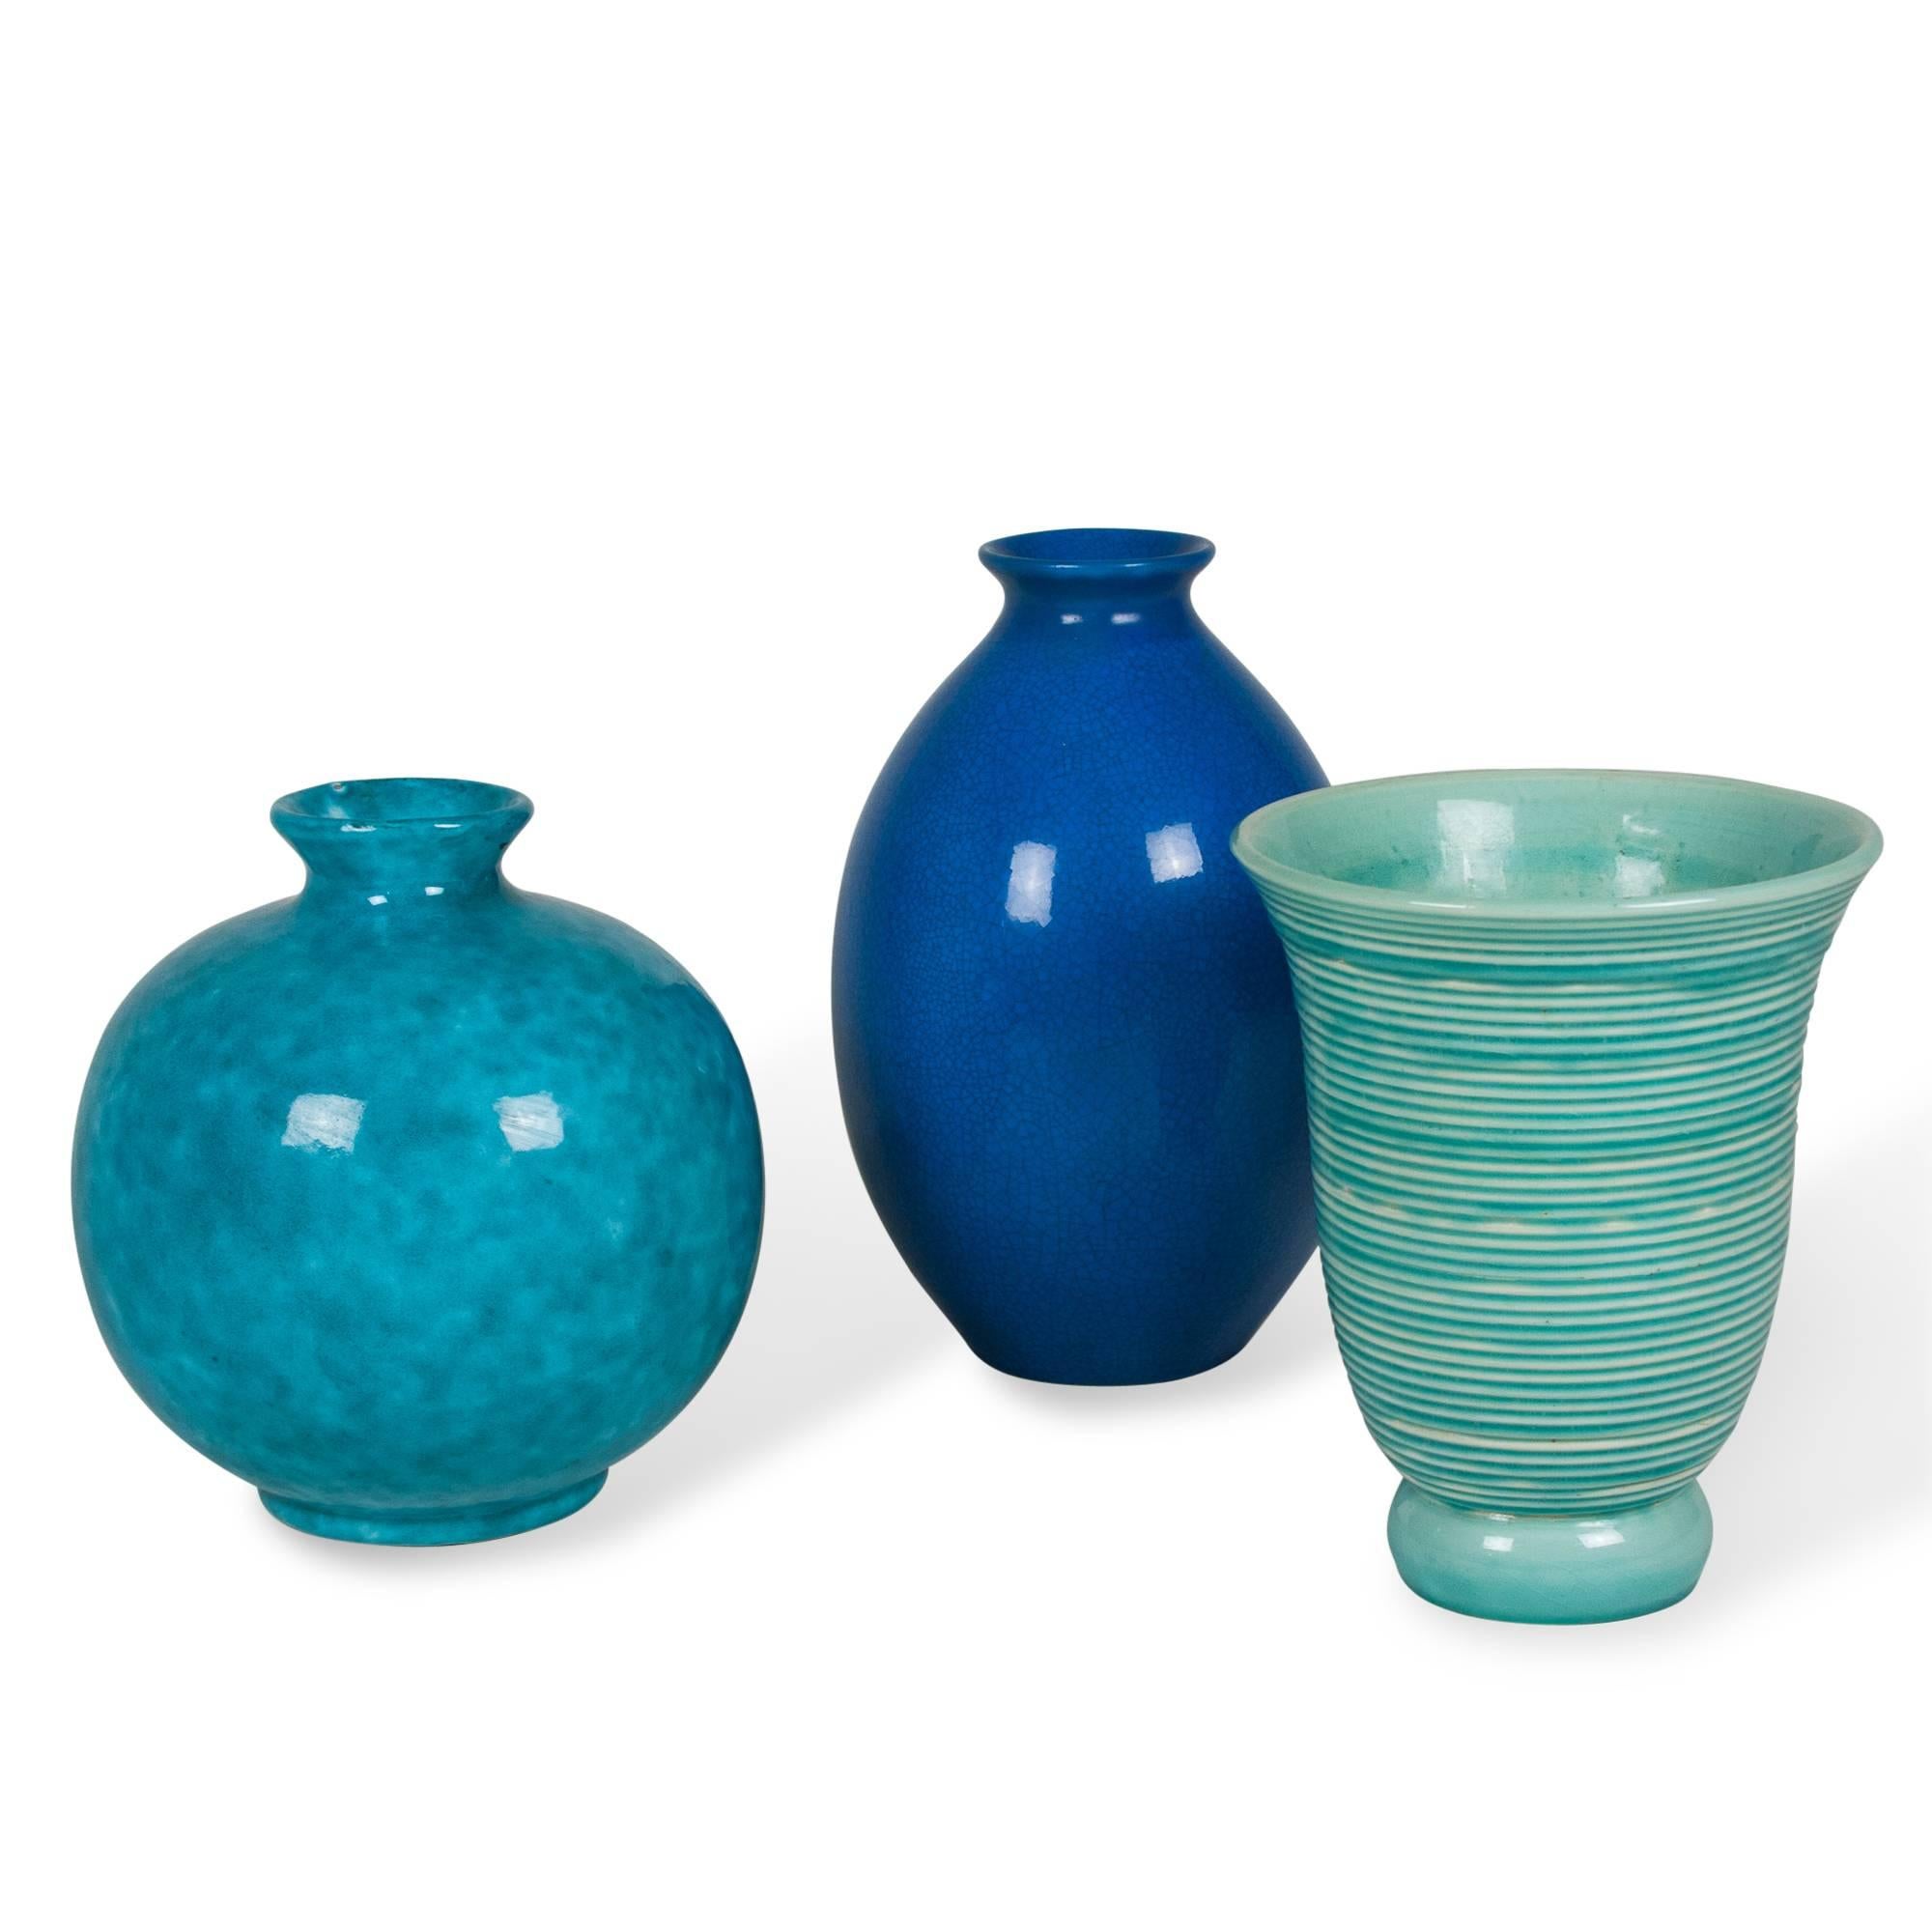 Set of three ceramic vases: 
On left: Mottled blue glazed ceramic vase, spherical shape with pinched neck, by Jerome Massier, Vallauris, France, 1930s. Signed to underside. Height 10 in,largest diamter 8.5 in. (Item #1804). 
In Center: Tall blue